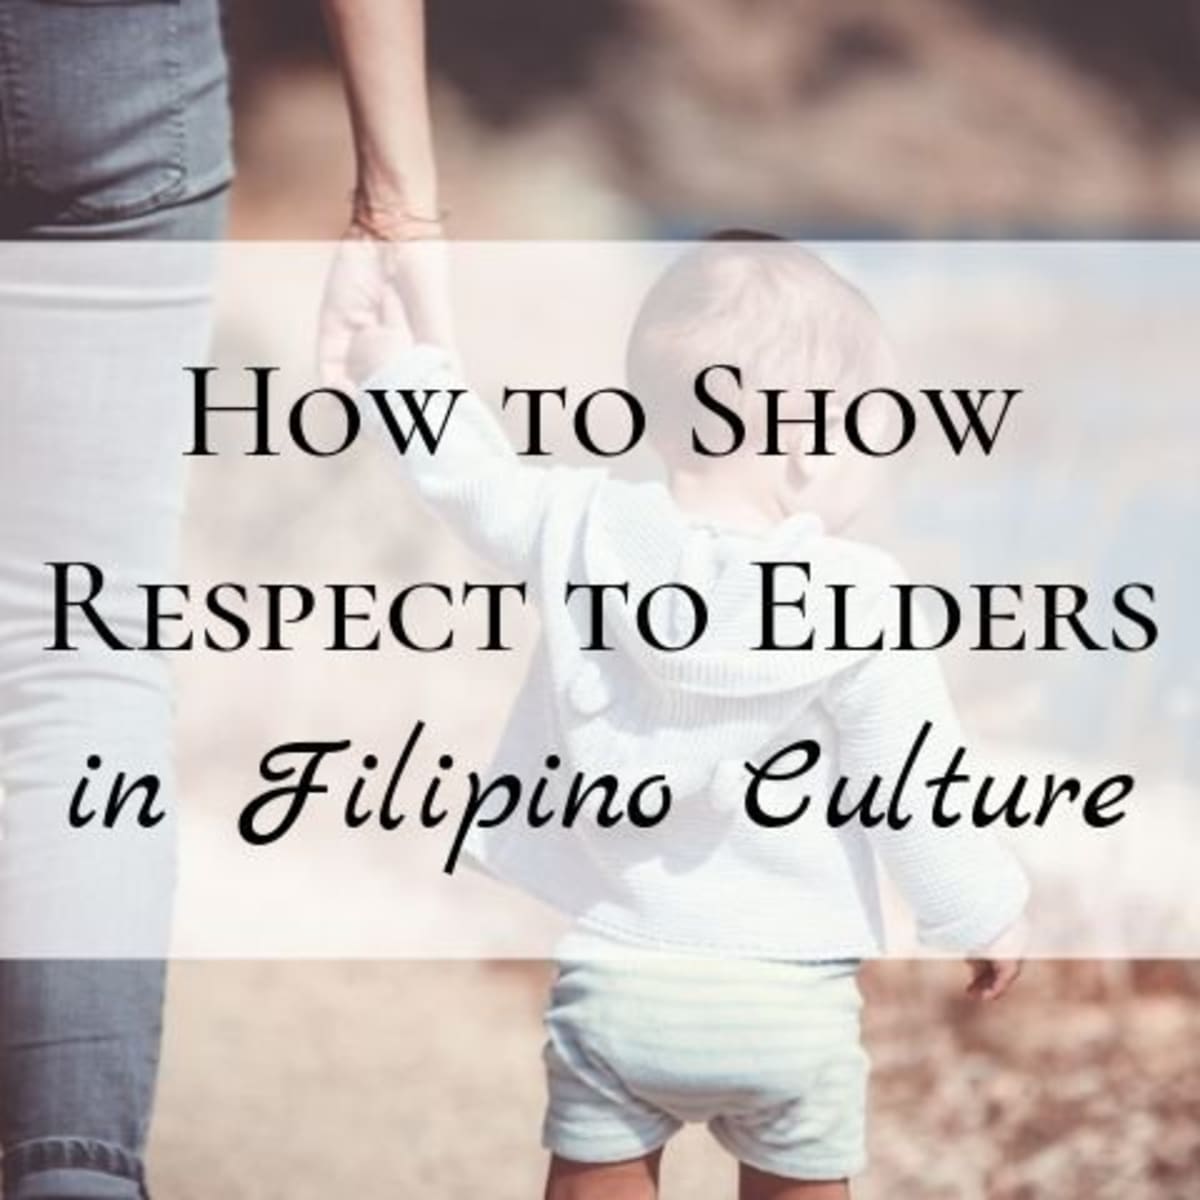 filipino culture and tradition clipart people